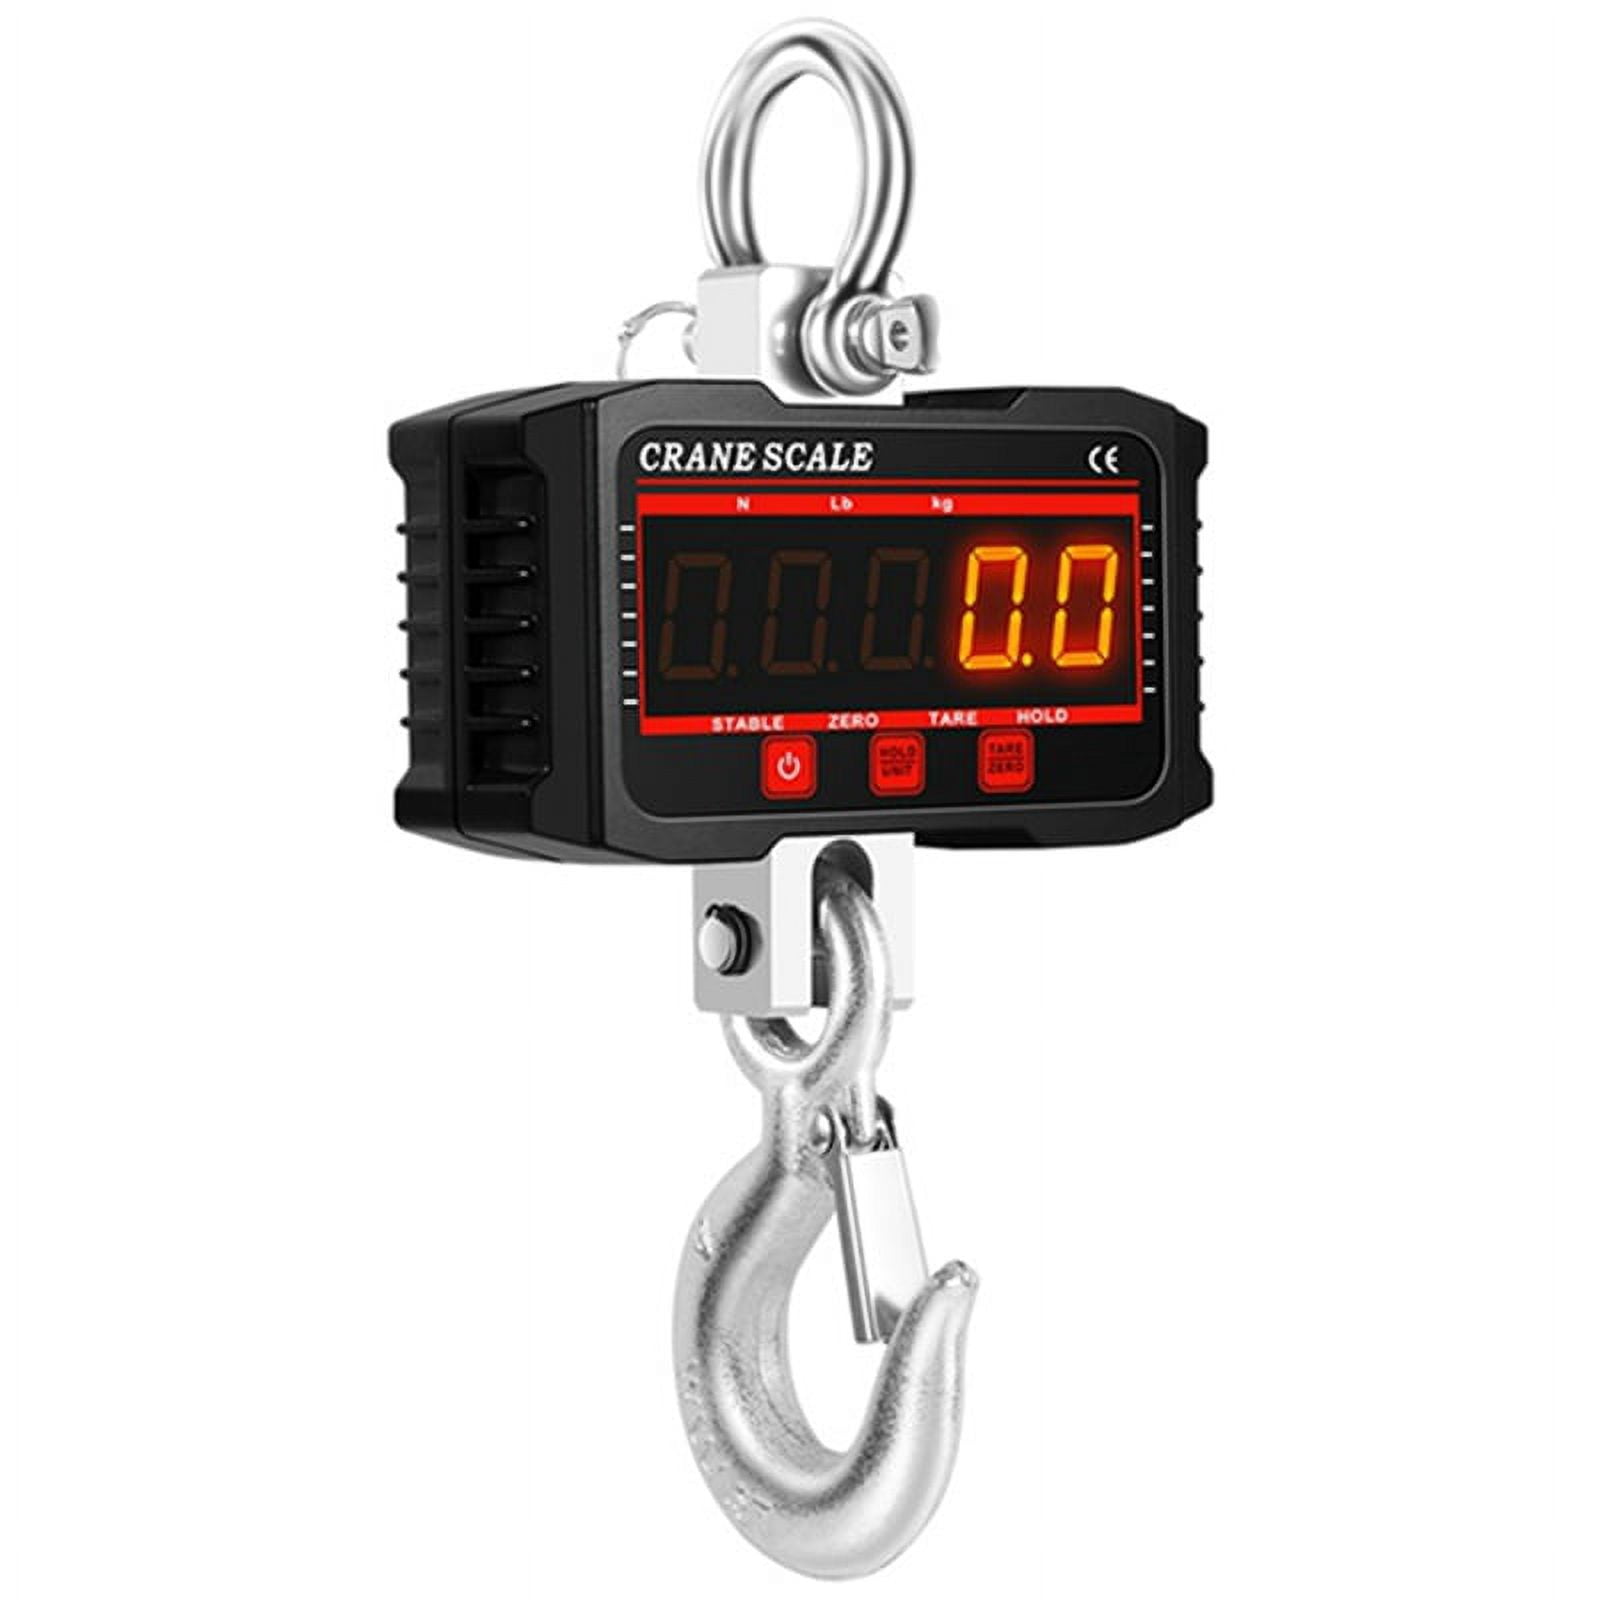 Digital Crane Scale 1500KG Industrial Hanging Scale,Portable Scale